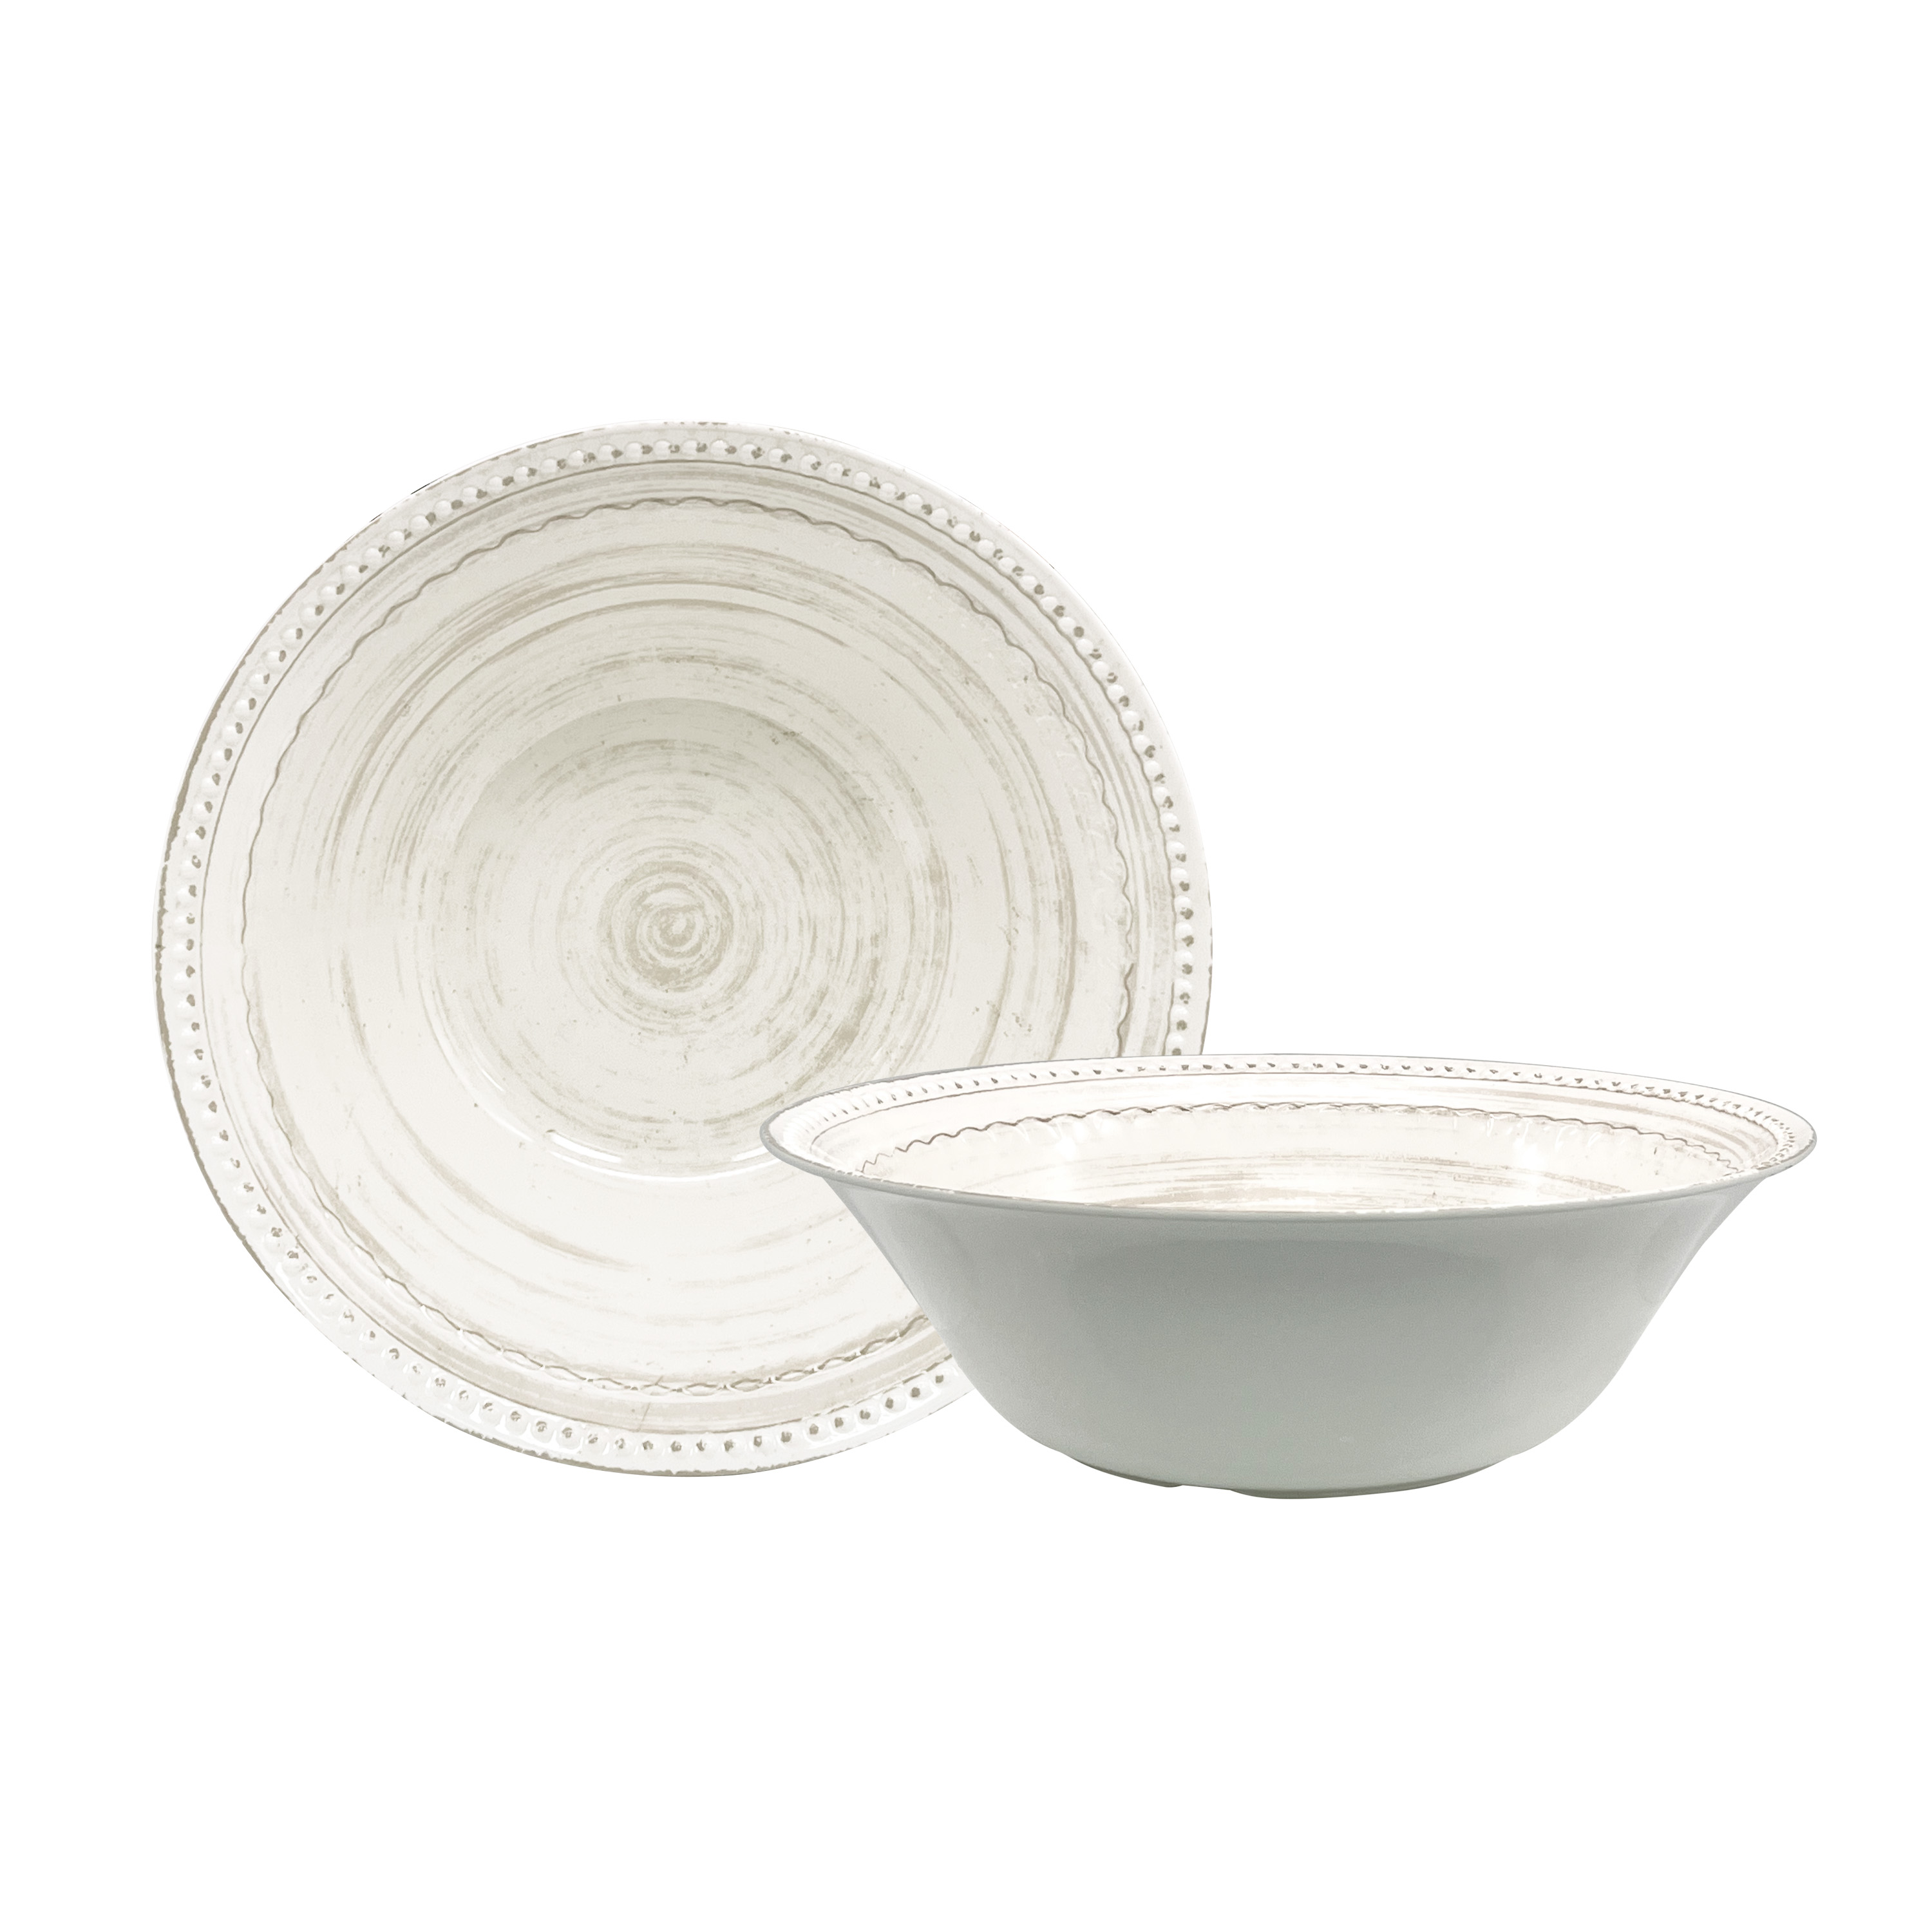 French Country 12-inch Melamine Serving Bowls, White, 2-piece set slideshow image 1